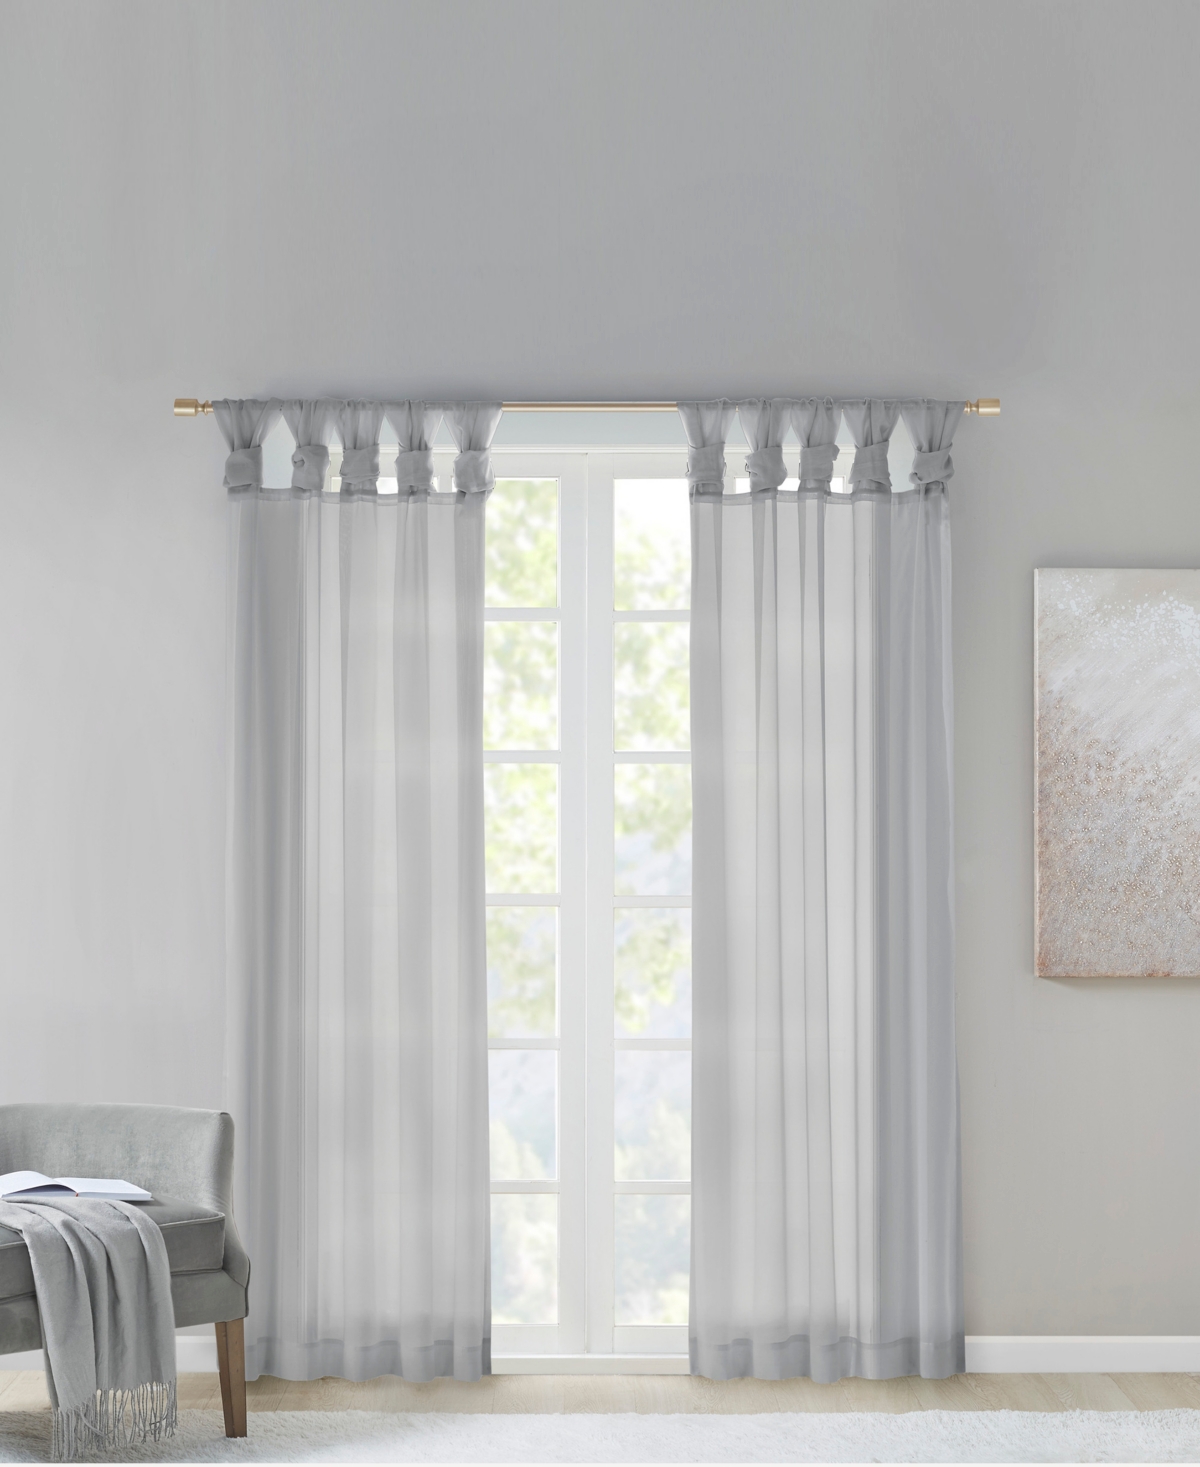 Ceres Twist Tab Voile Sheer Window Curtain Pair, 50"W x 95"L, 2 Pack - Light Grey